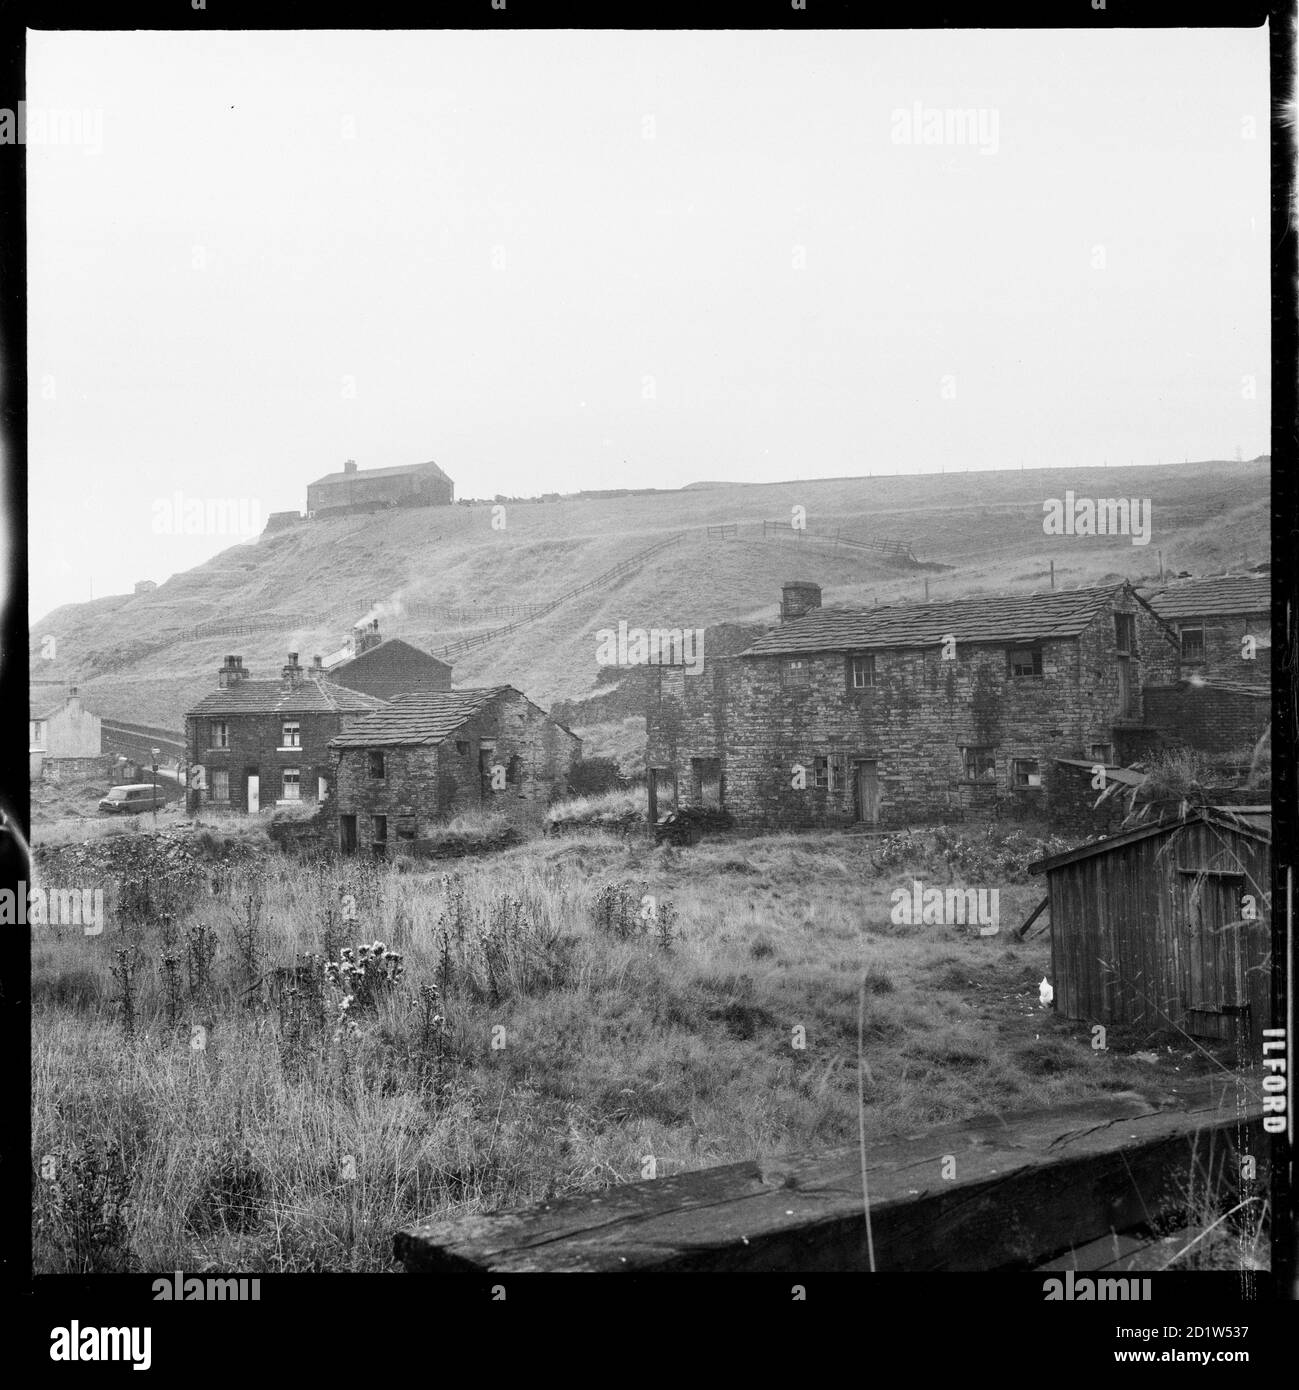 A view looking north west from land off Market Street, Shawforth showing a cluster of houses located on Old Lane and Cowm Street, with the house known as Cowm, visible on the hill above, Whitworth, Rossendale, Lancashire, UK. Stock Photo